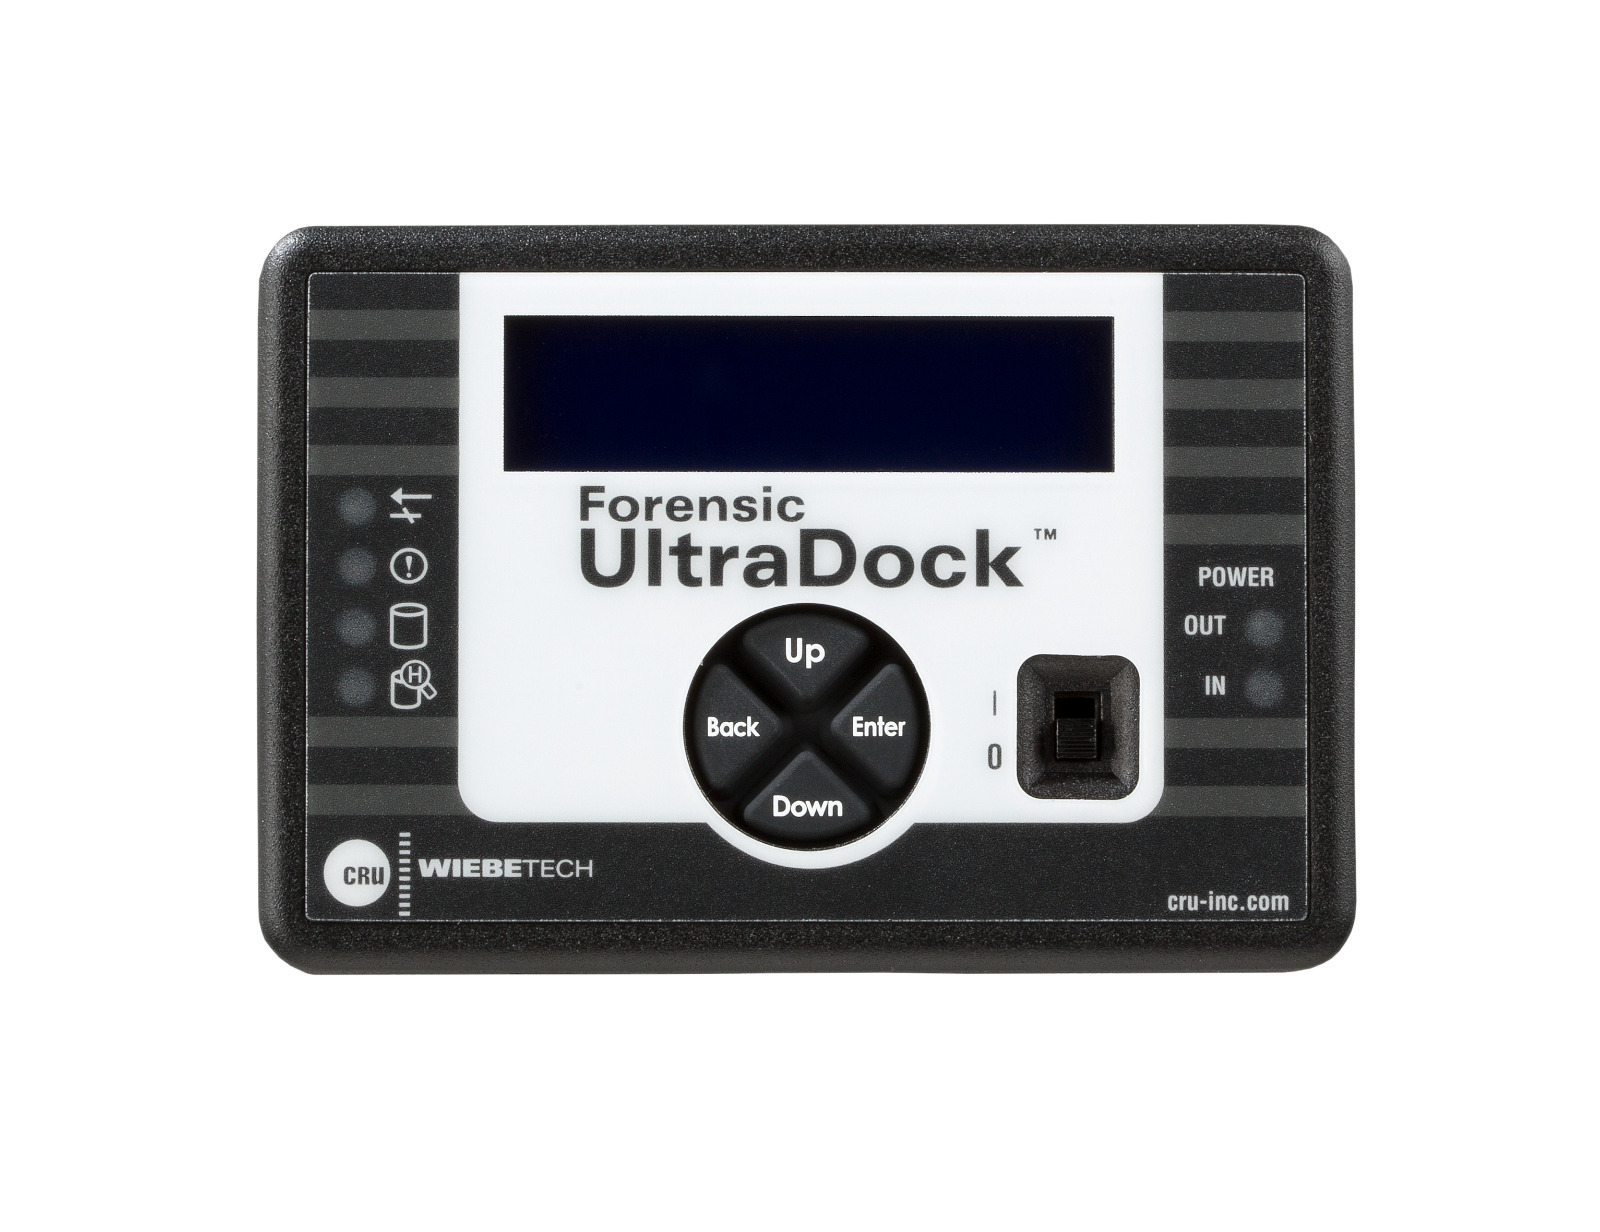 Wiebetech Forensic Ultradock Sans Security For500 Tools For Forensic Analysis